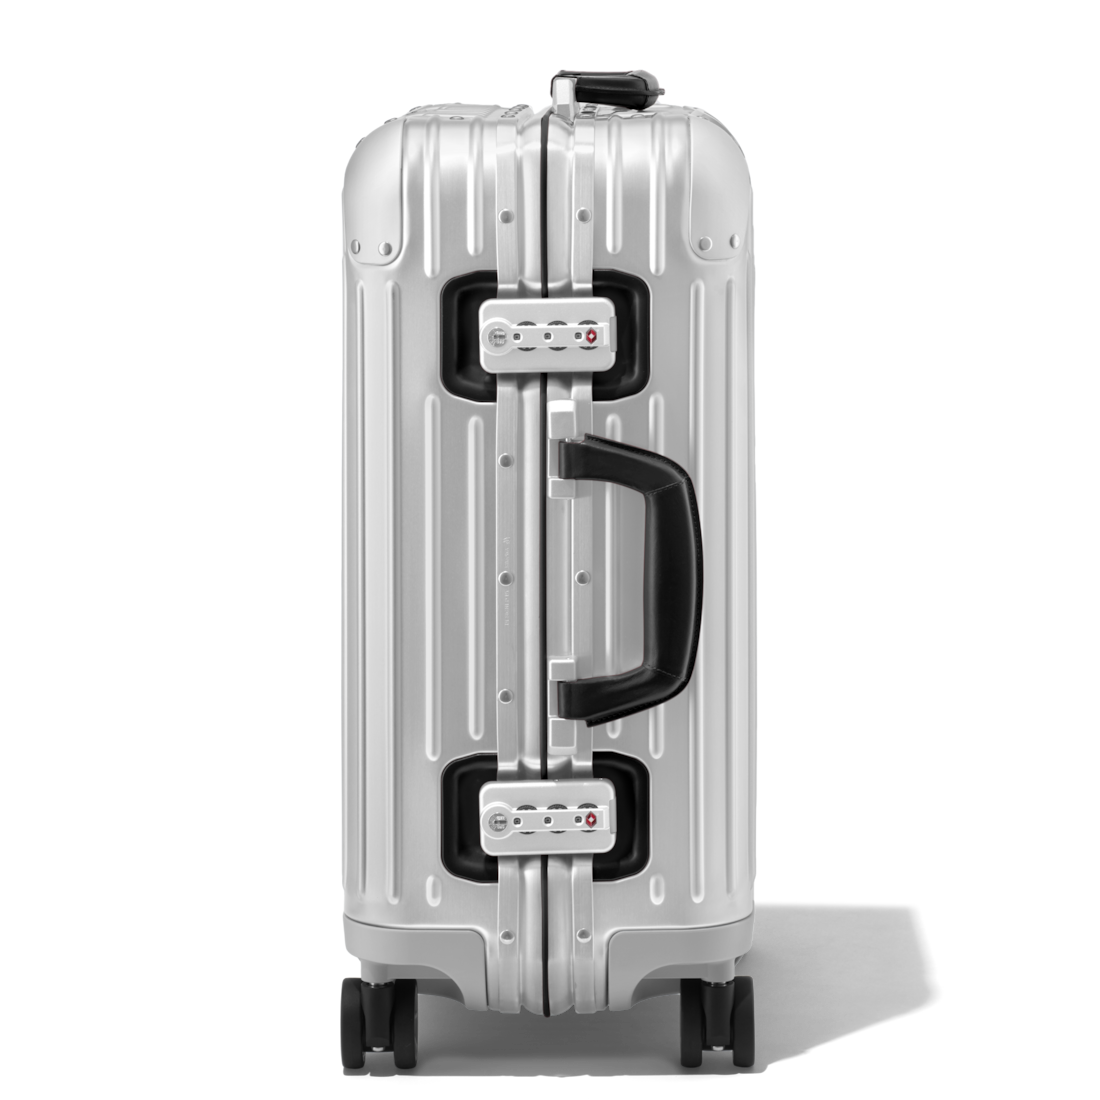 Your Rimowa damaged or stolen. Now what?!